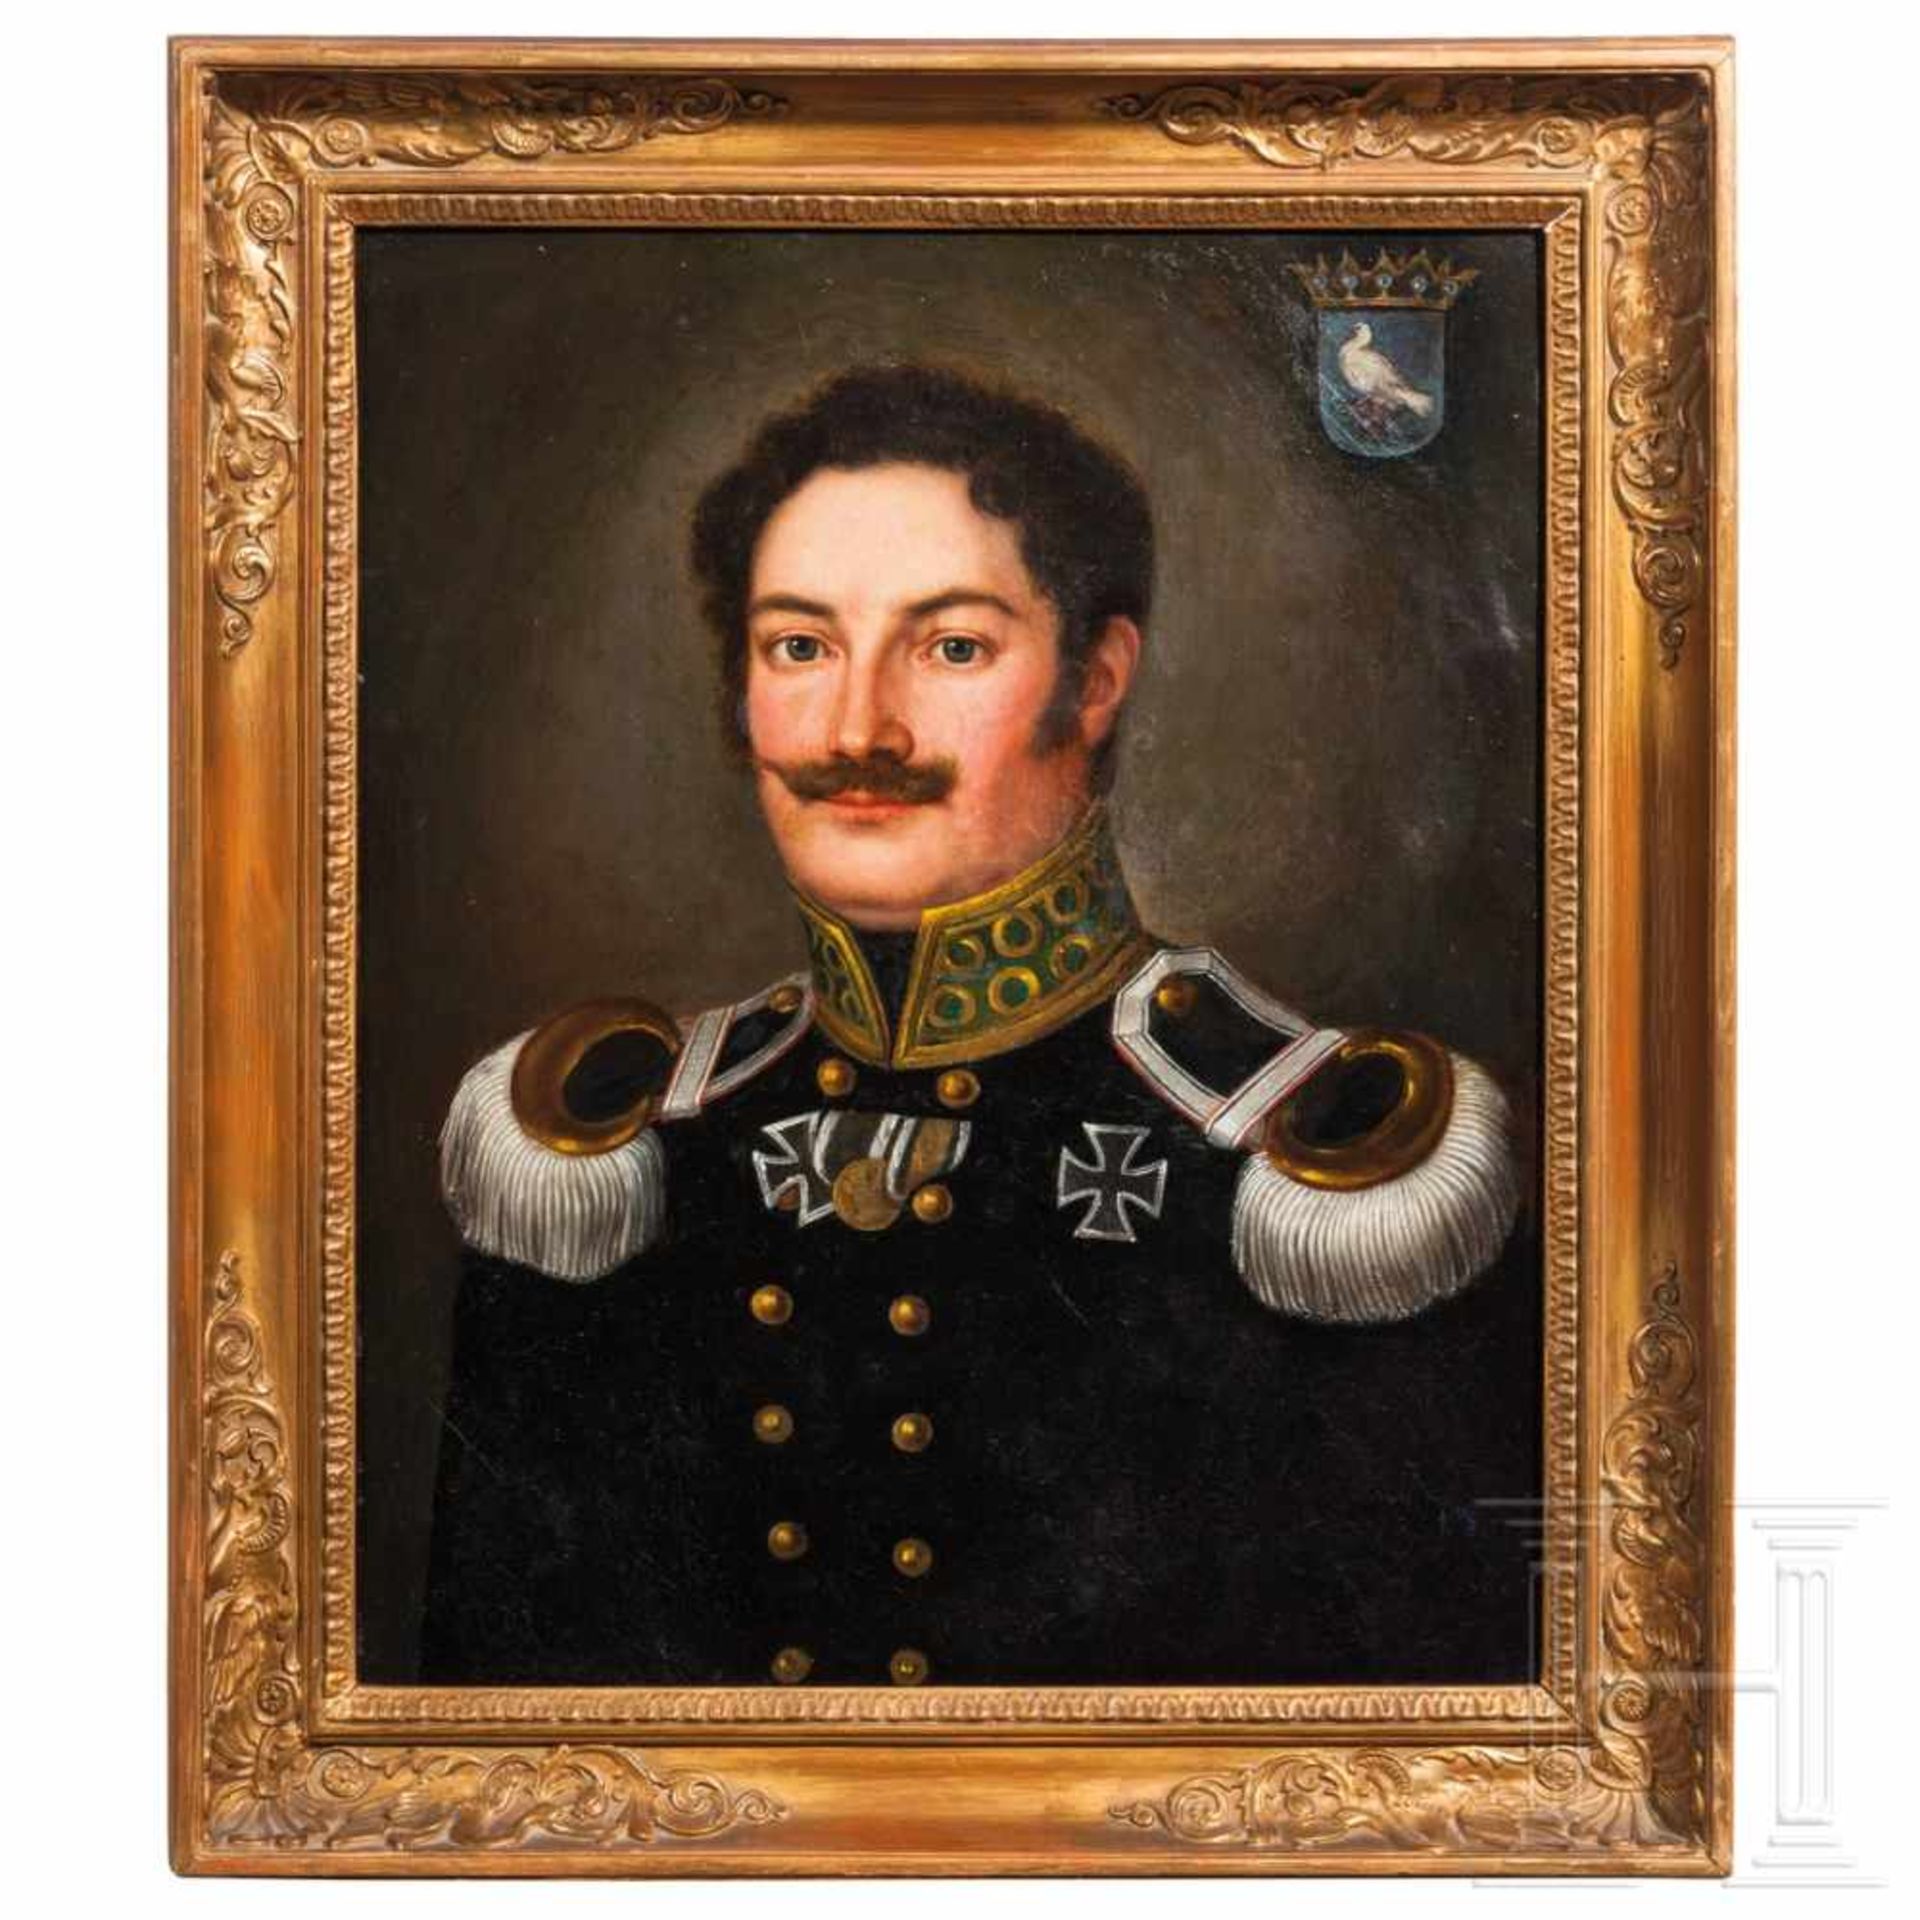 A portrait painting of a major of the riflemen in the liberation warsÖl auf Leinwand, Portrait in